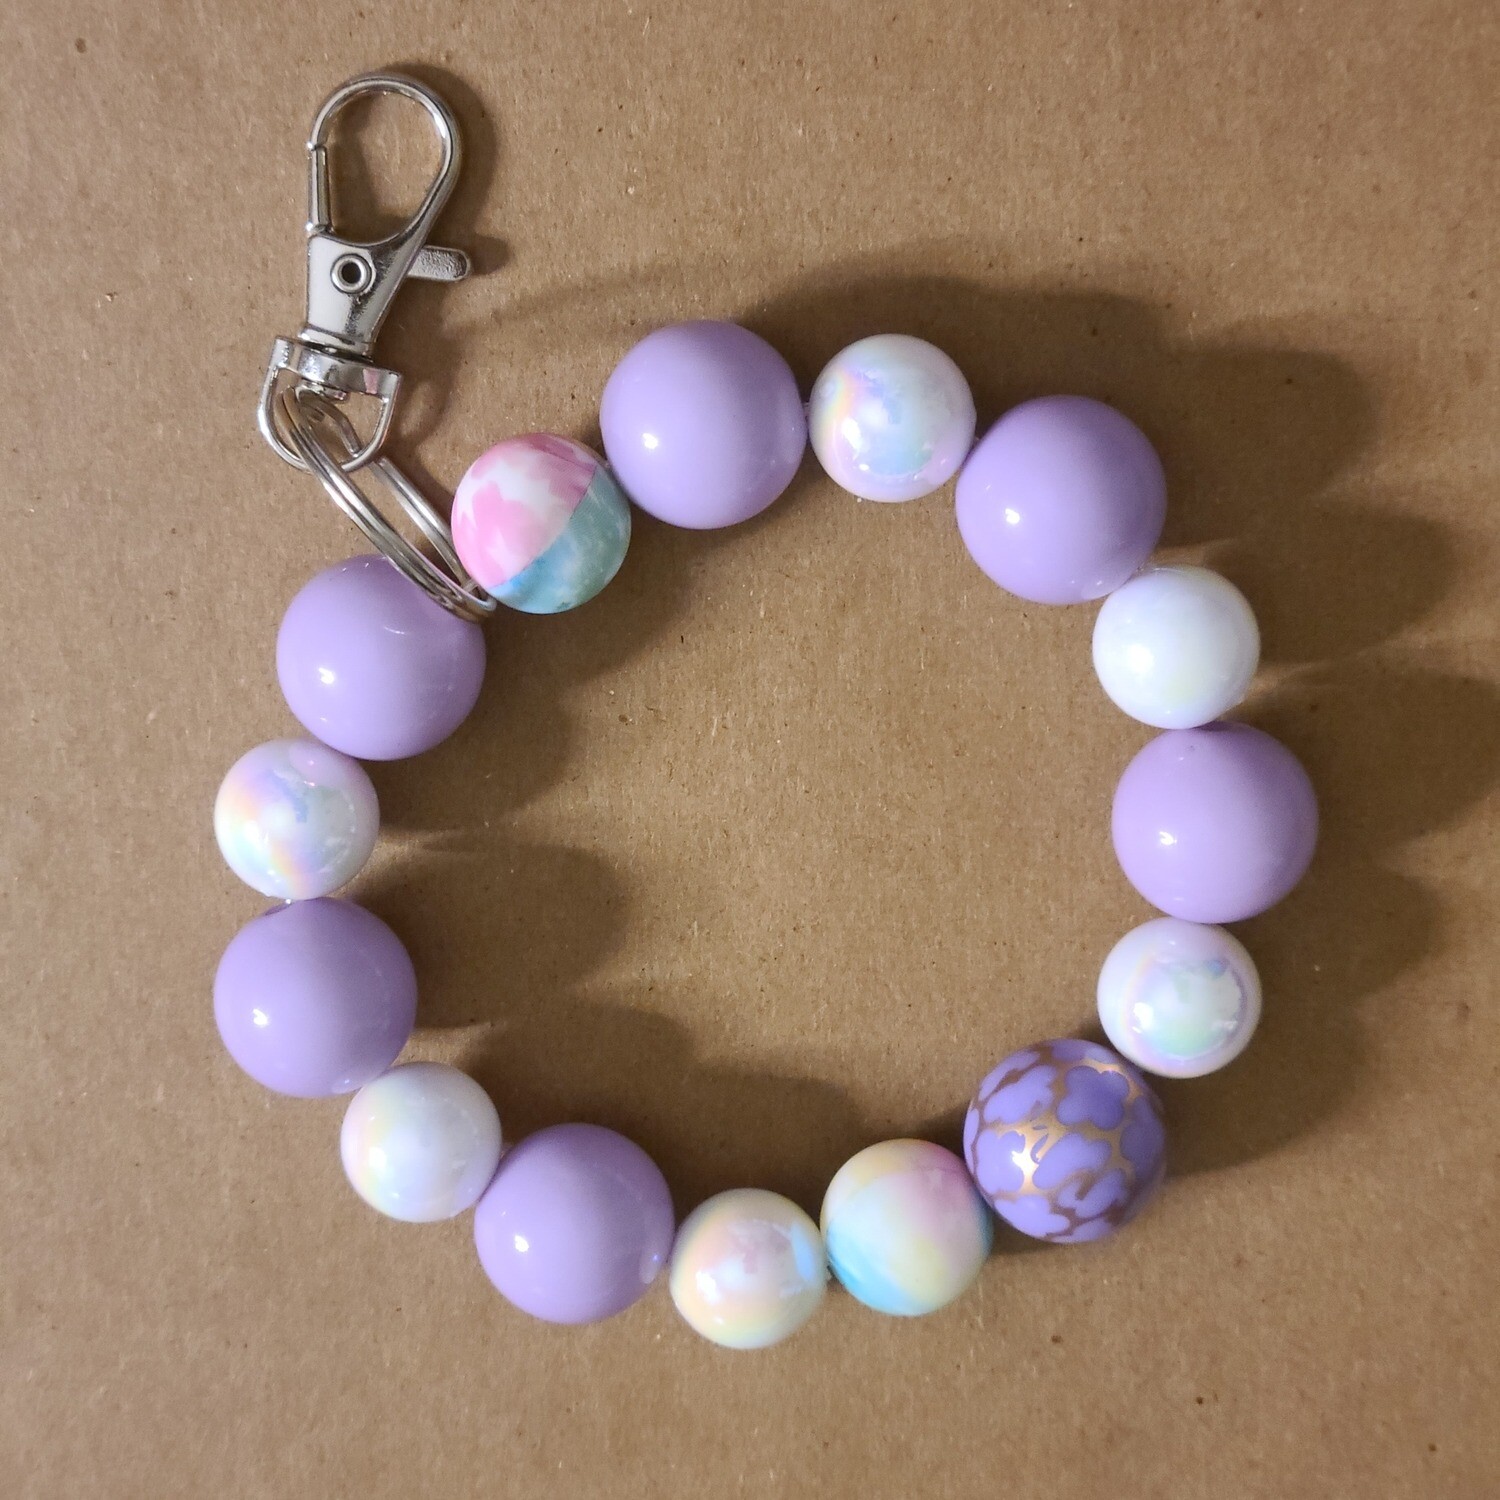 1) Lavender and Blue Wristlet Keychain – LBL Creations